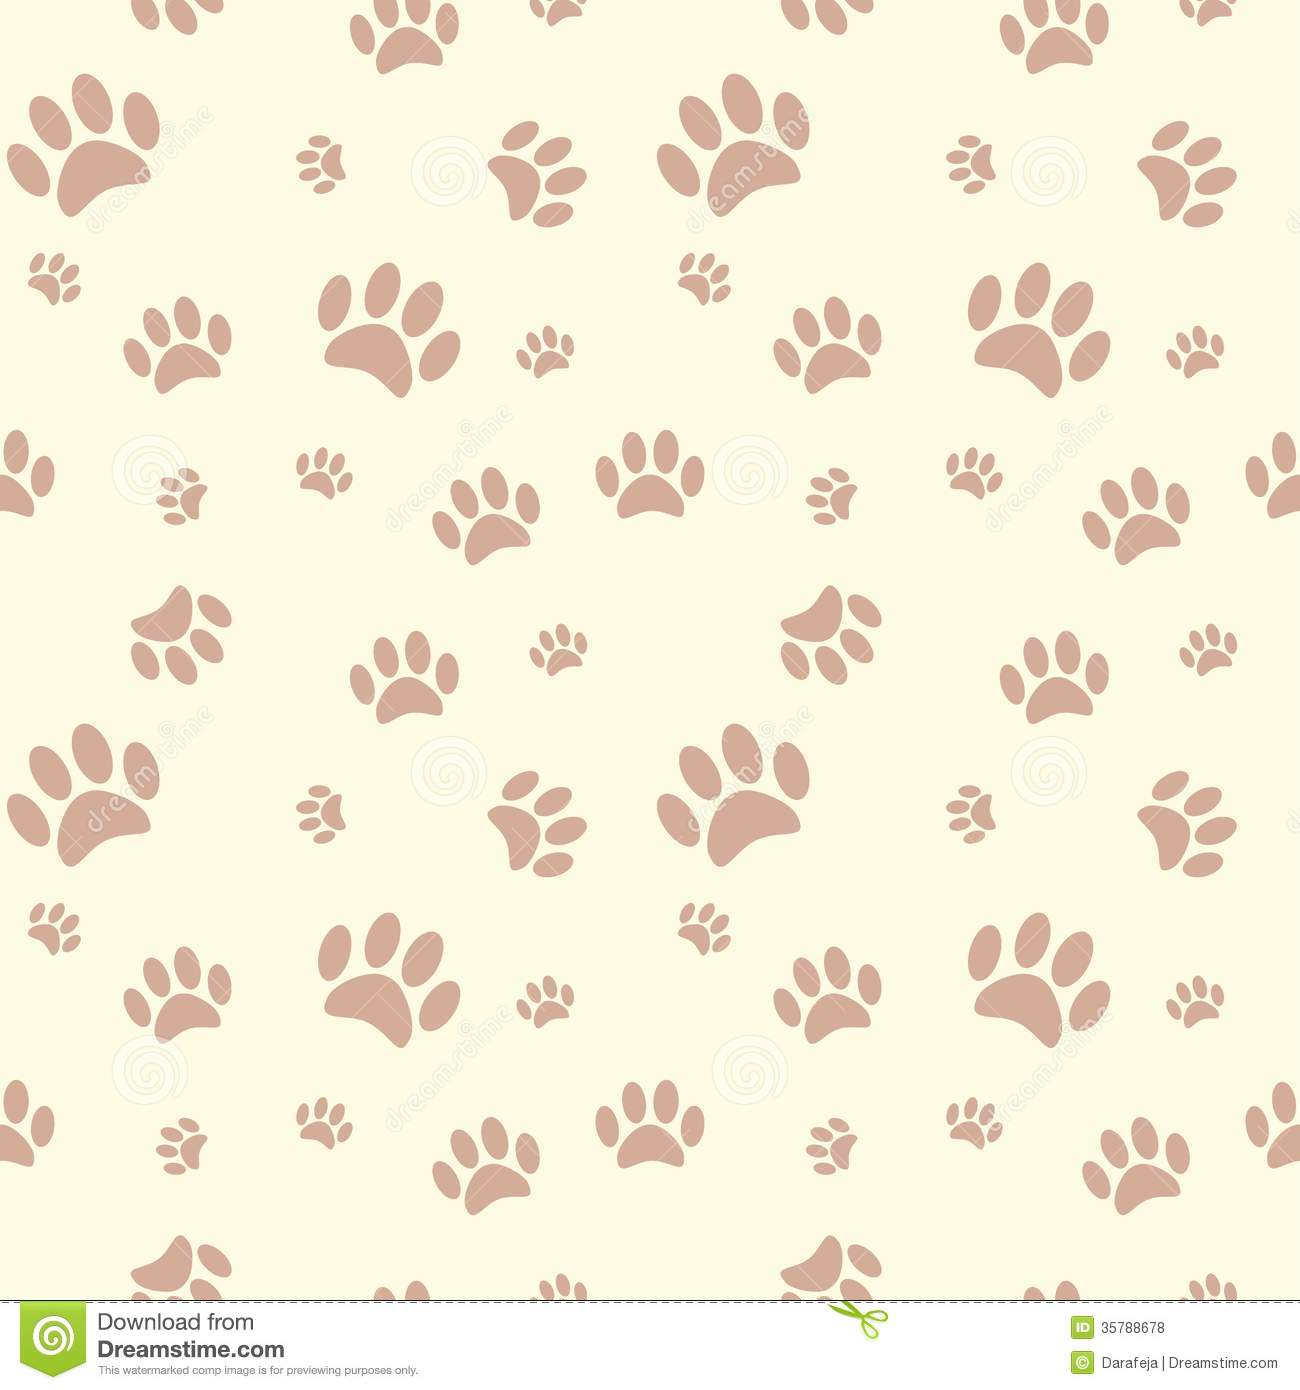 Royalty Stock Photos Background With Dog Paw Print And Bone